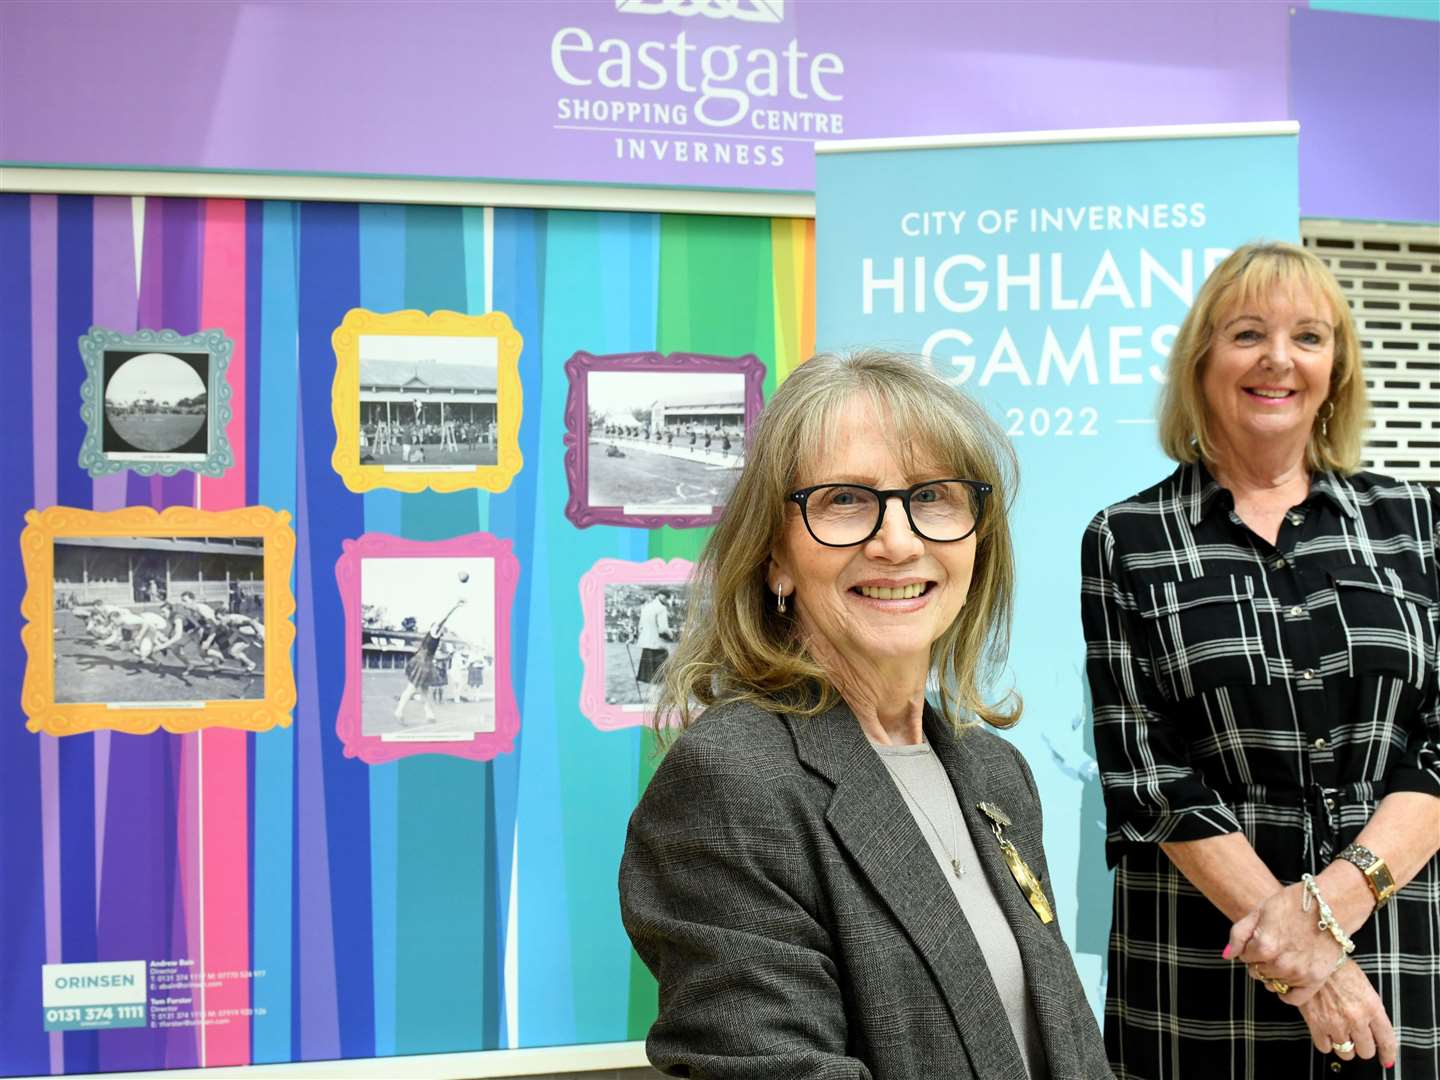 With the Inverness Highland Games set to return this weekend Inverness Provost Glynis Campbell-Sinclair and Jackie Cuddy, Eastgate Shopping Centre manager, take a look at images captured from the past.